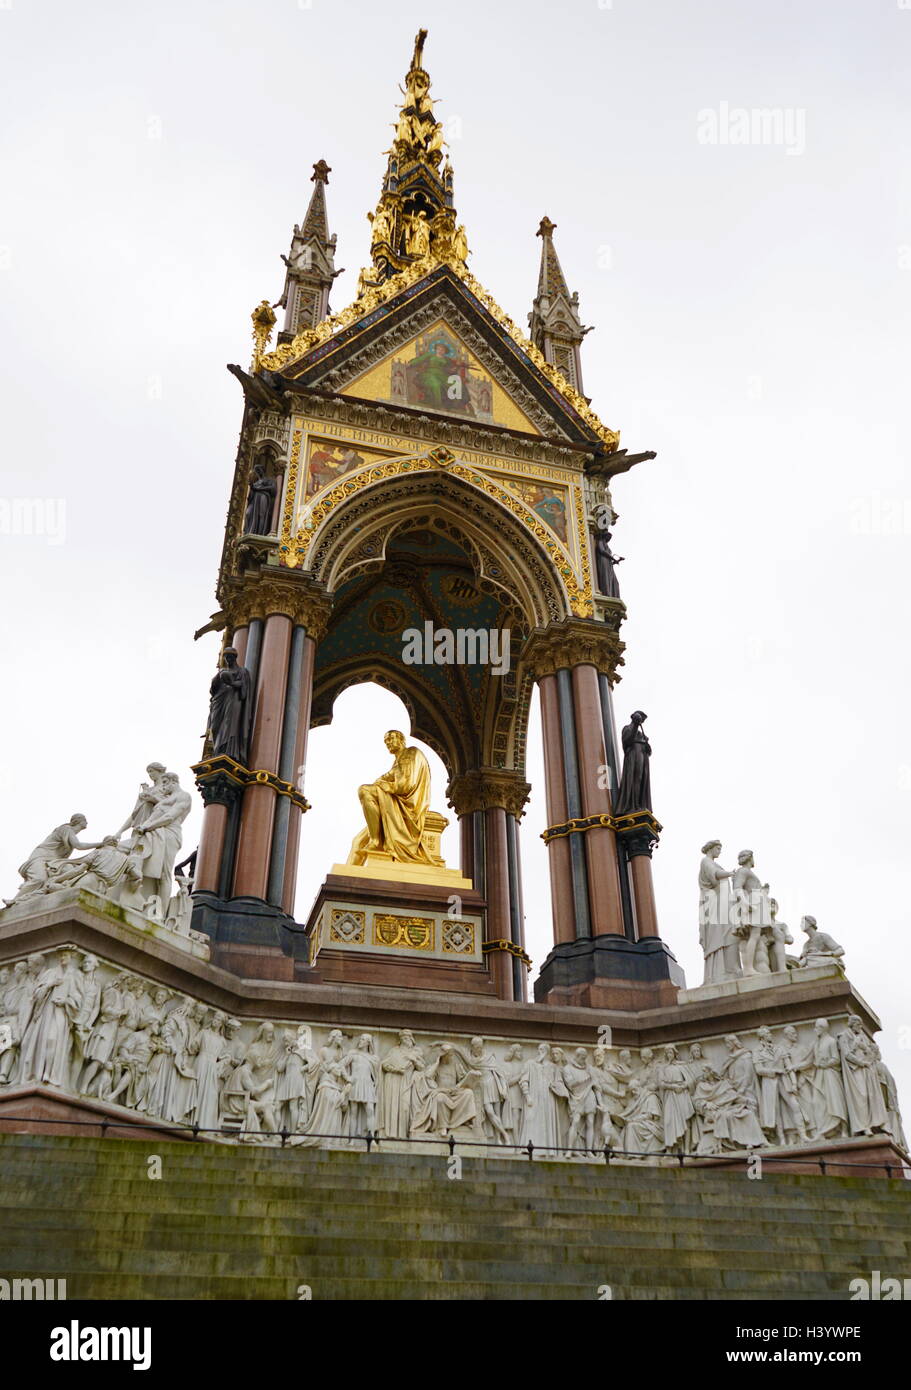 The Albert Memorial in Kensington Gardens, London. Commissioned by Queen Victoria in memory of her beloved husband, Prince Albert who died of typhoid in 1861. The memorial was designed by Sir George Gilbert Scott in the Gothic Revival style. Opened in July 1872 by Queen Victoria. Stock Photo